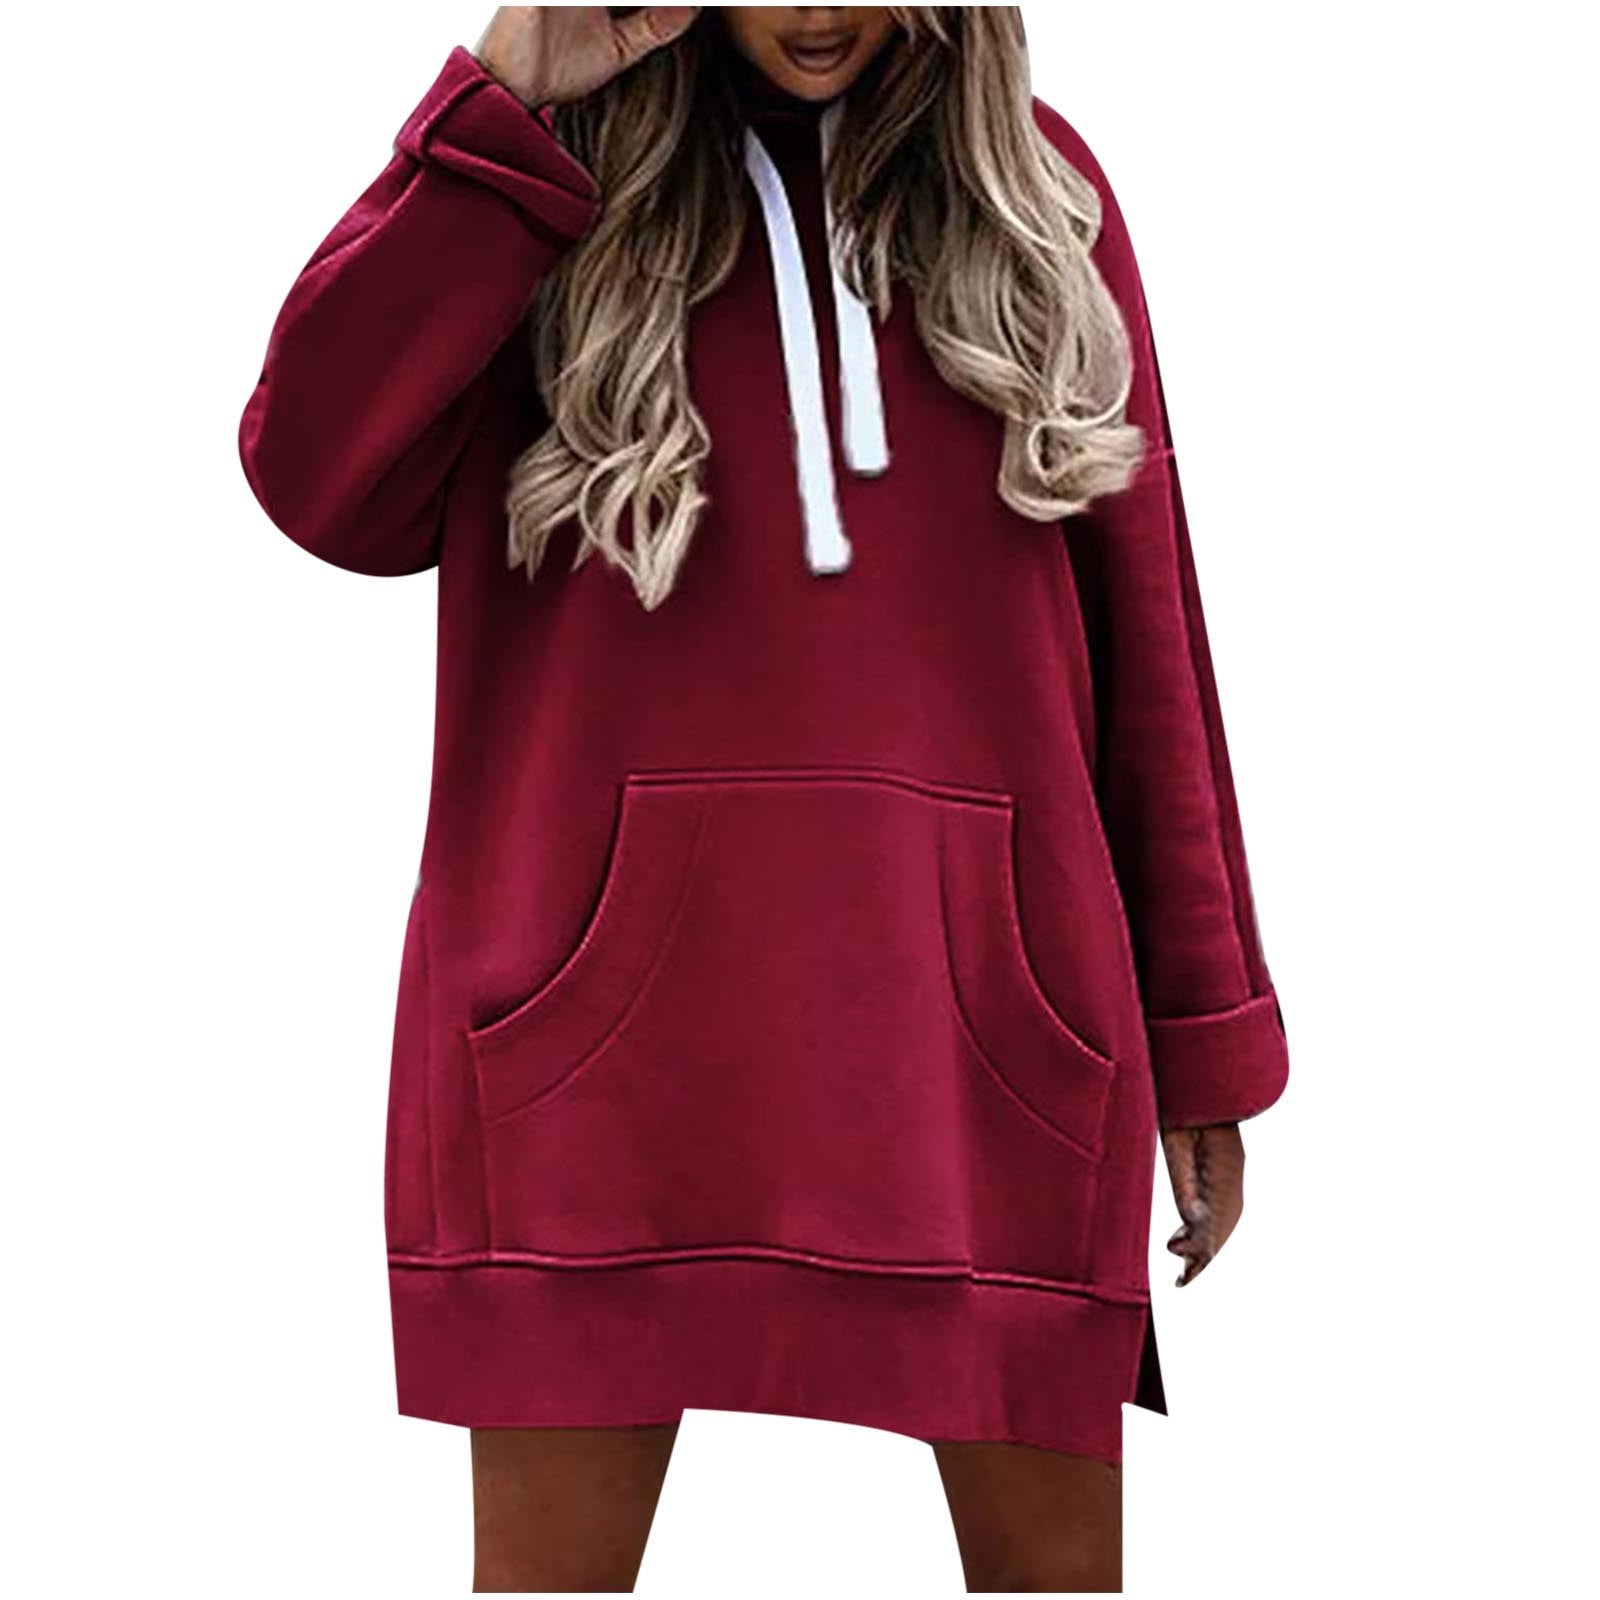 Kirundo Women's 2020 Winter Long Sleeves Sweatshirt Dress Solid Color Hoodie  Drawstring Belt Long Pullover with Side Pockets (Small - ShopStyle